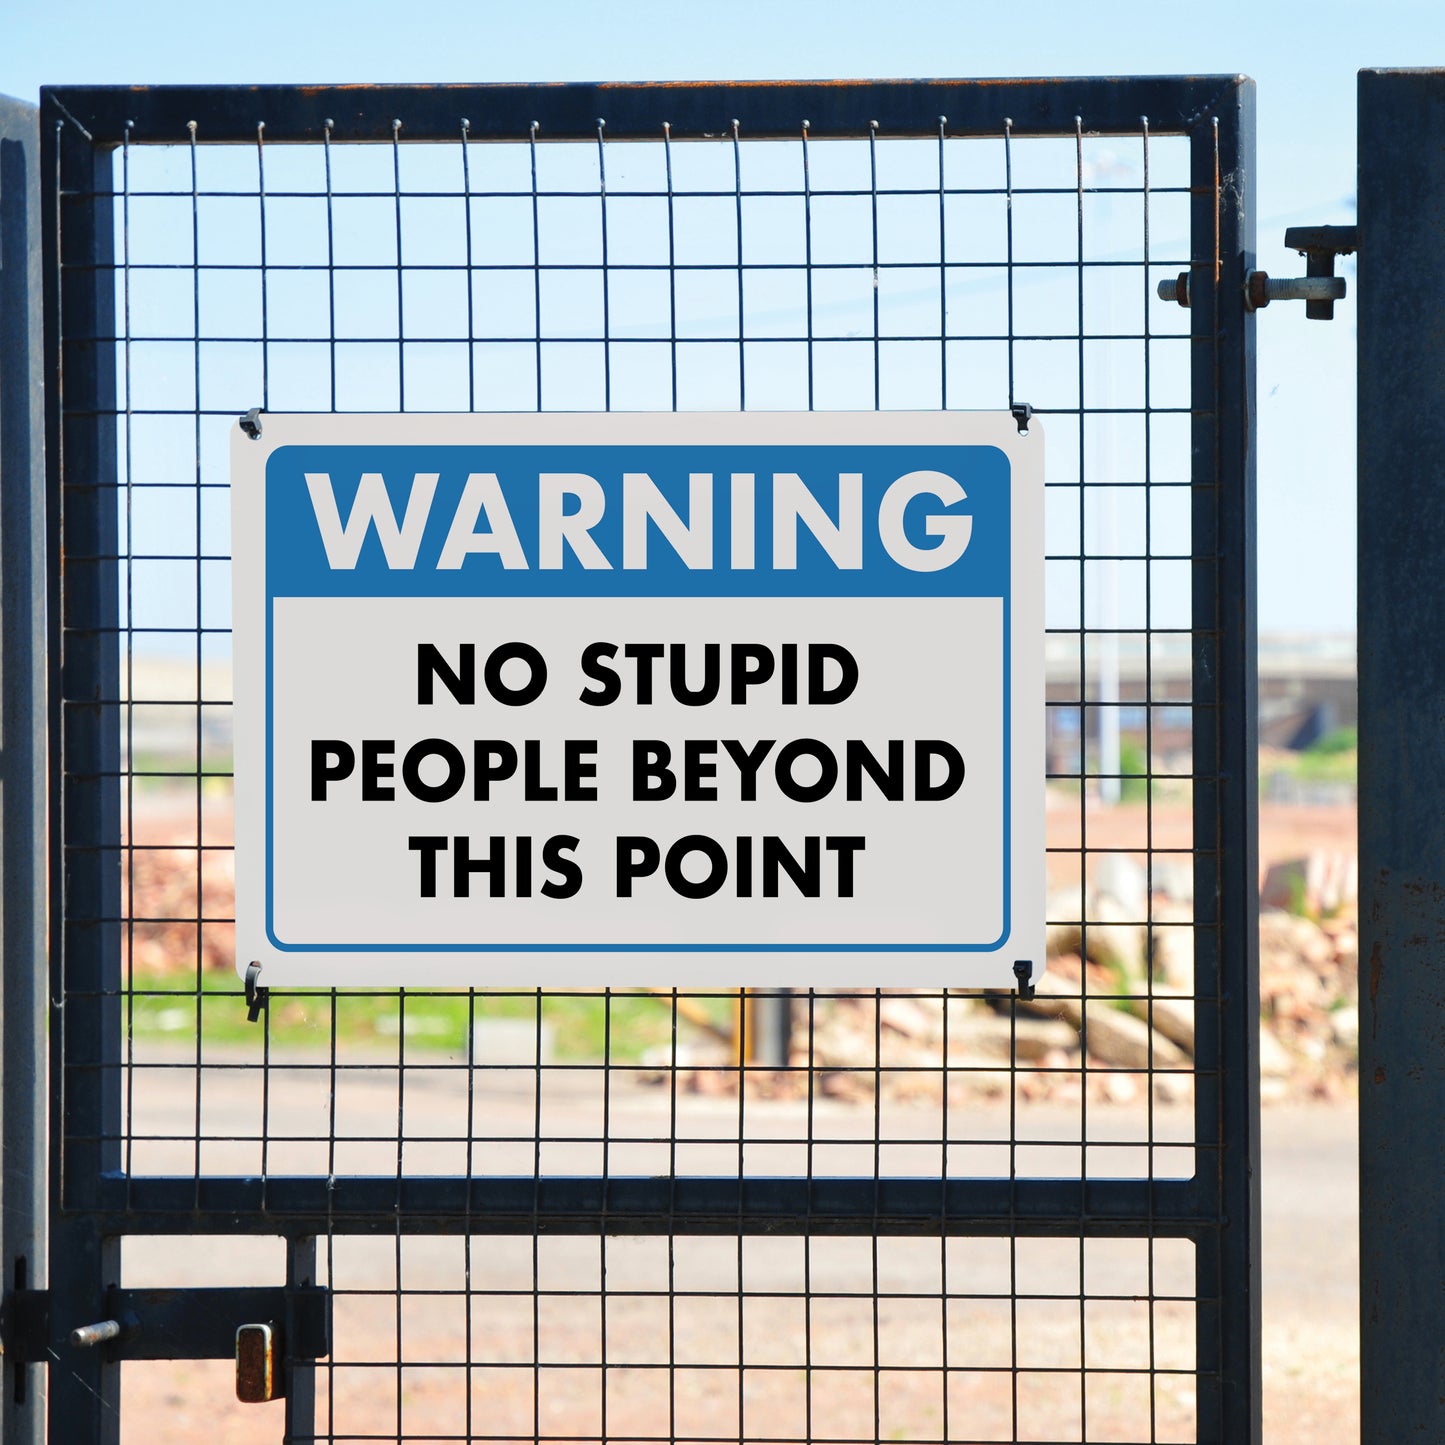 Warning - No Stupid People Beyond This Point - 8" x 12" Funny Plastic (PVC) Sign (With Pre-Drilled Holes for Easy Mounting)